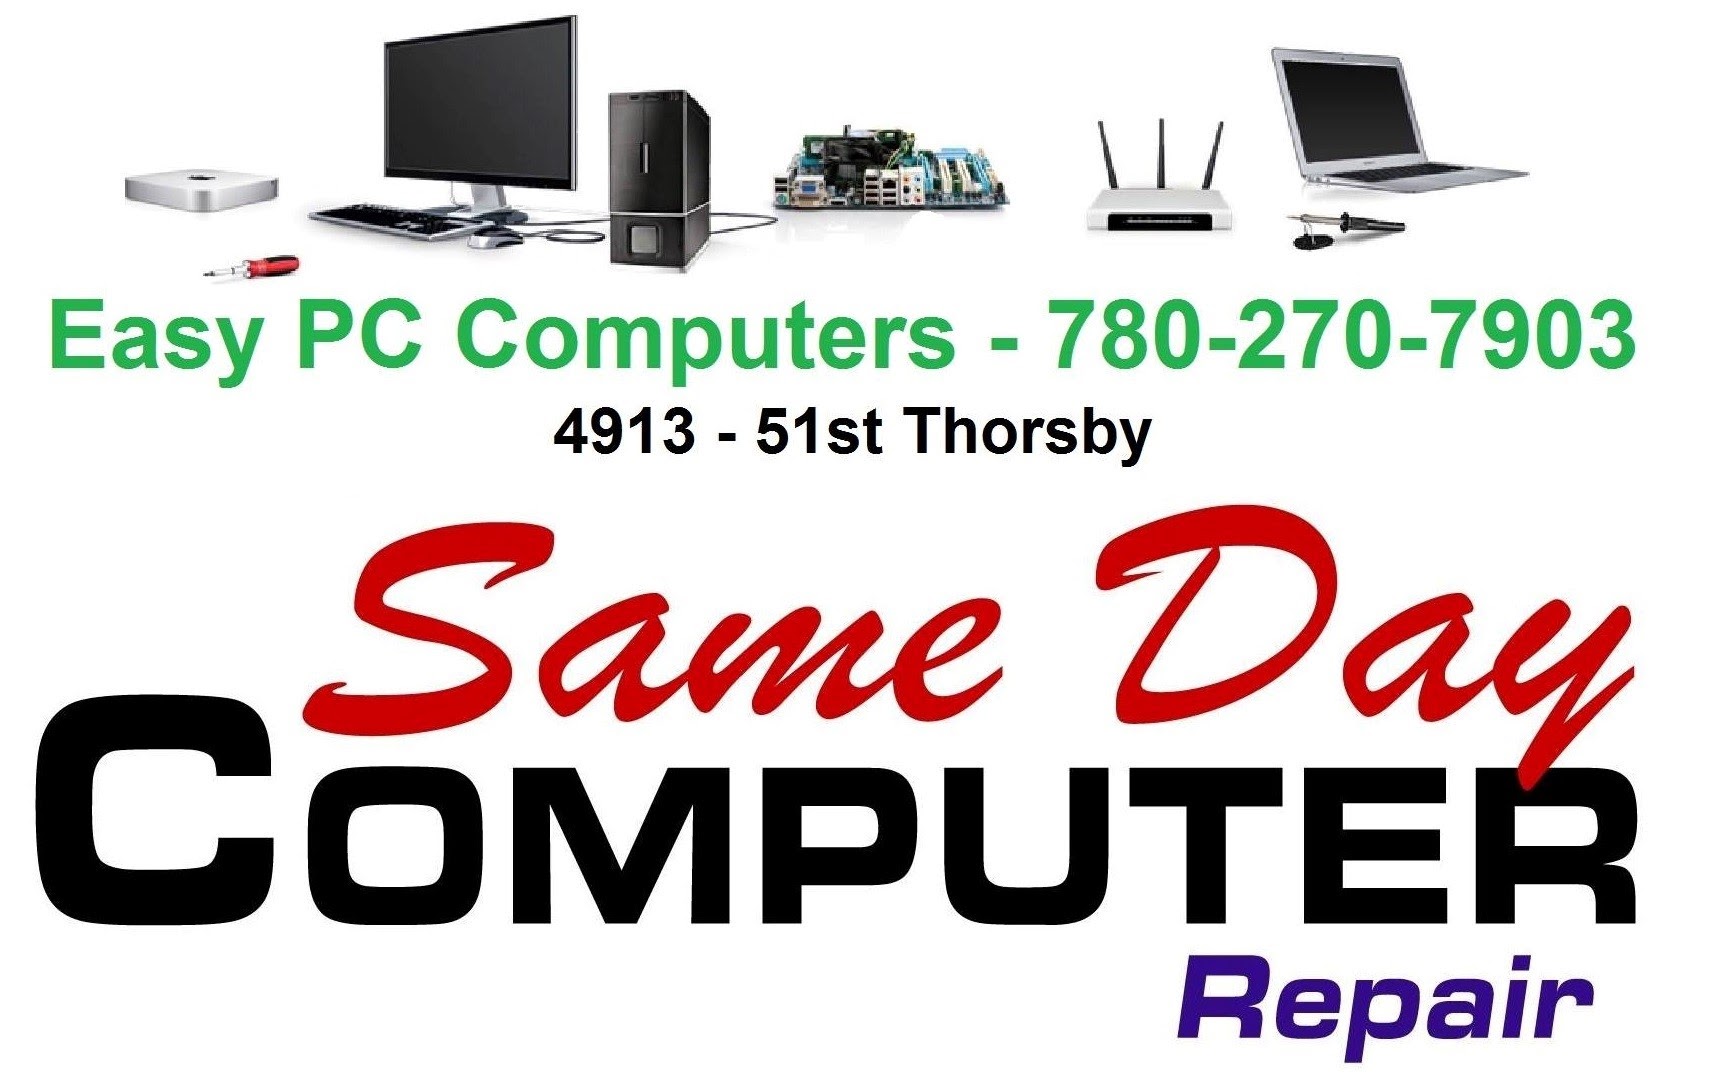 Easy PC Computers 4913 51 St, Thorsby Alberta T0C 2P0